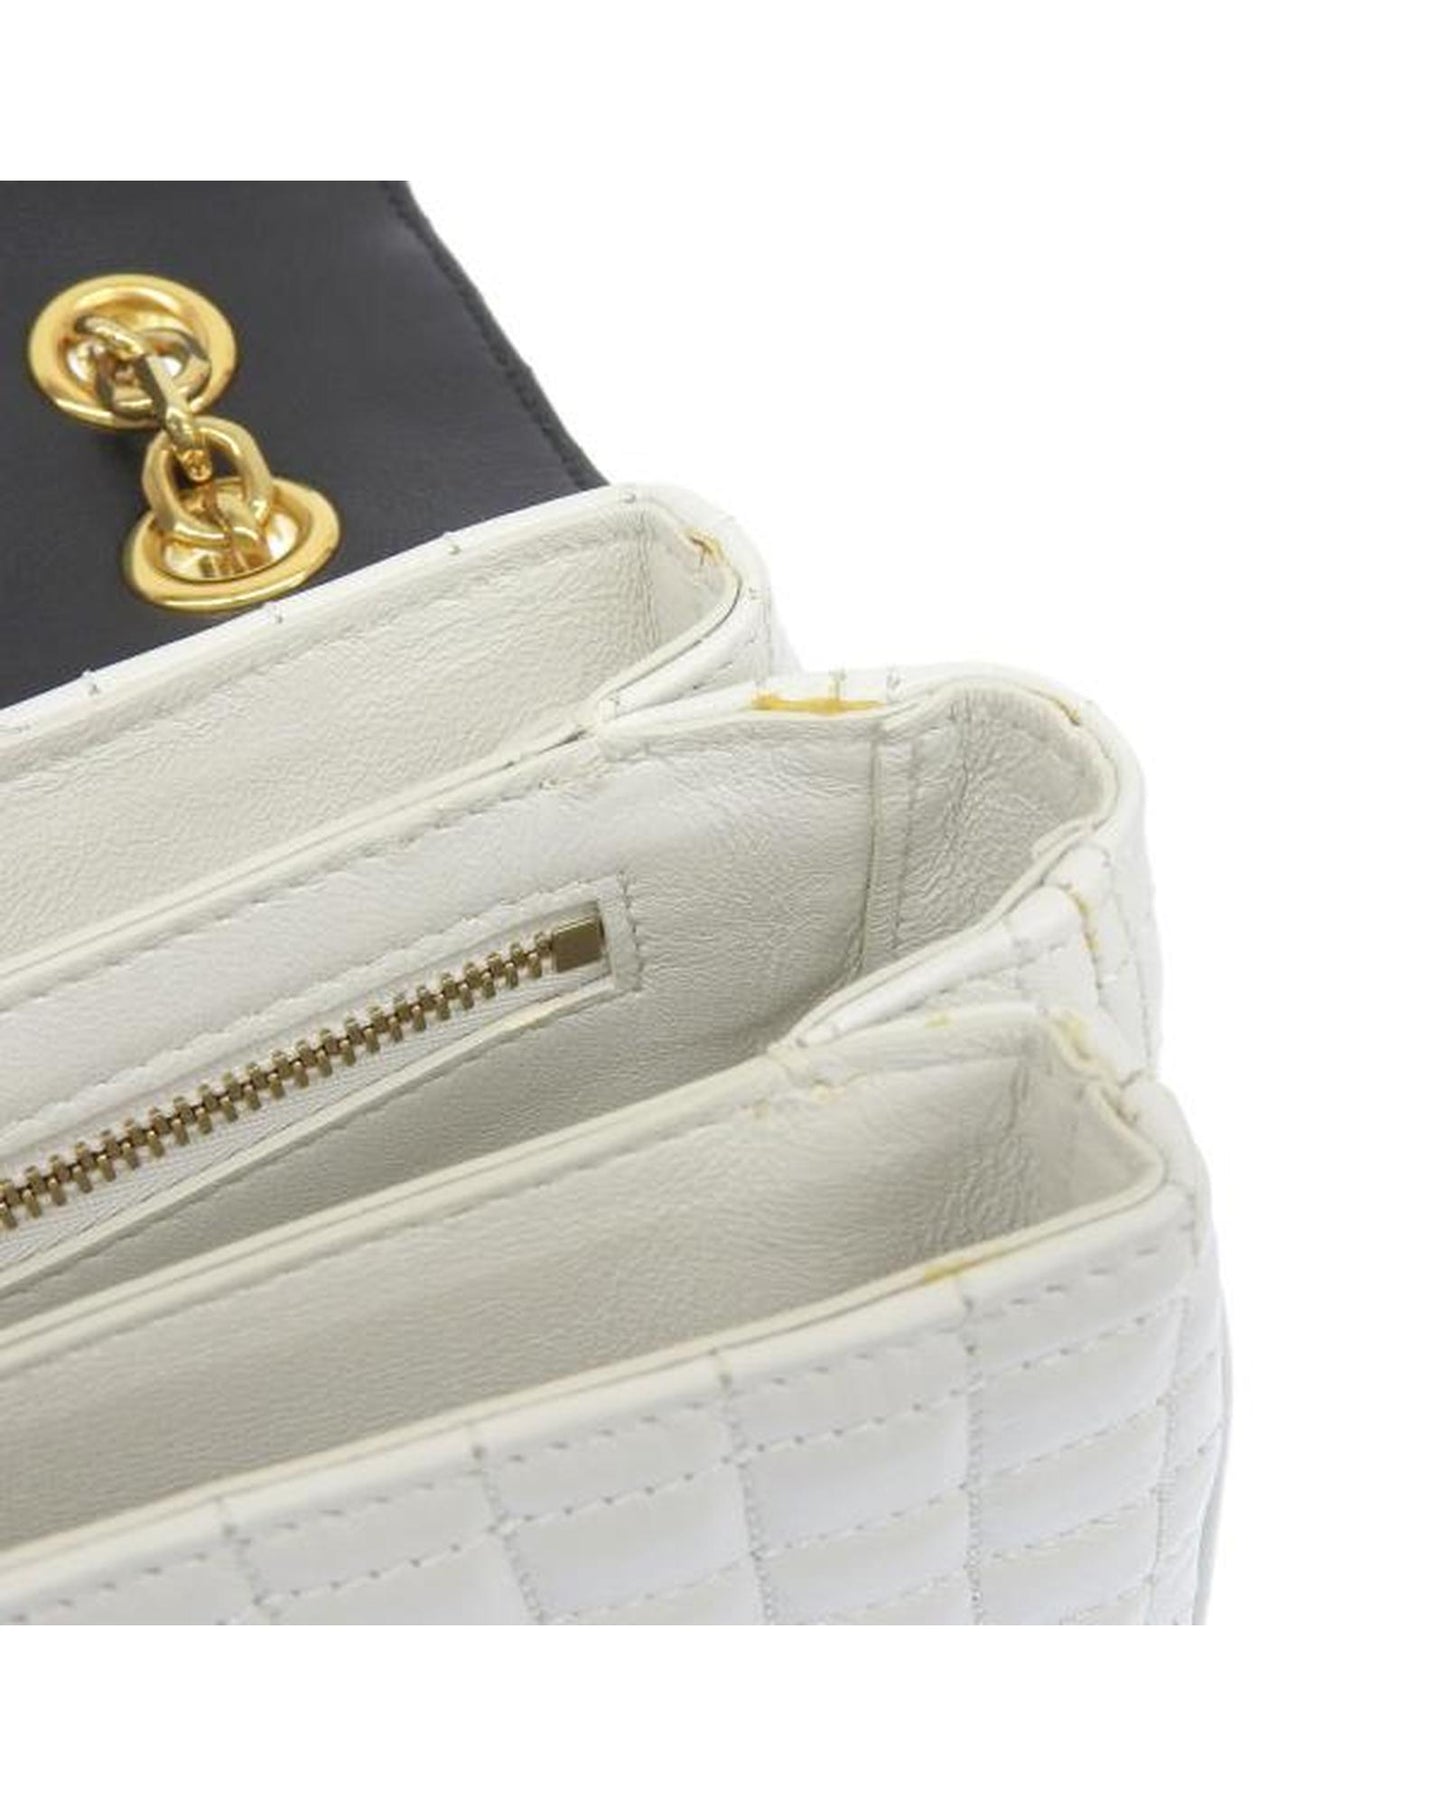 Celine Women's Quilted Leather Shoulder Bag with Bicolor Detailing in White